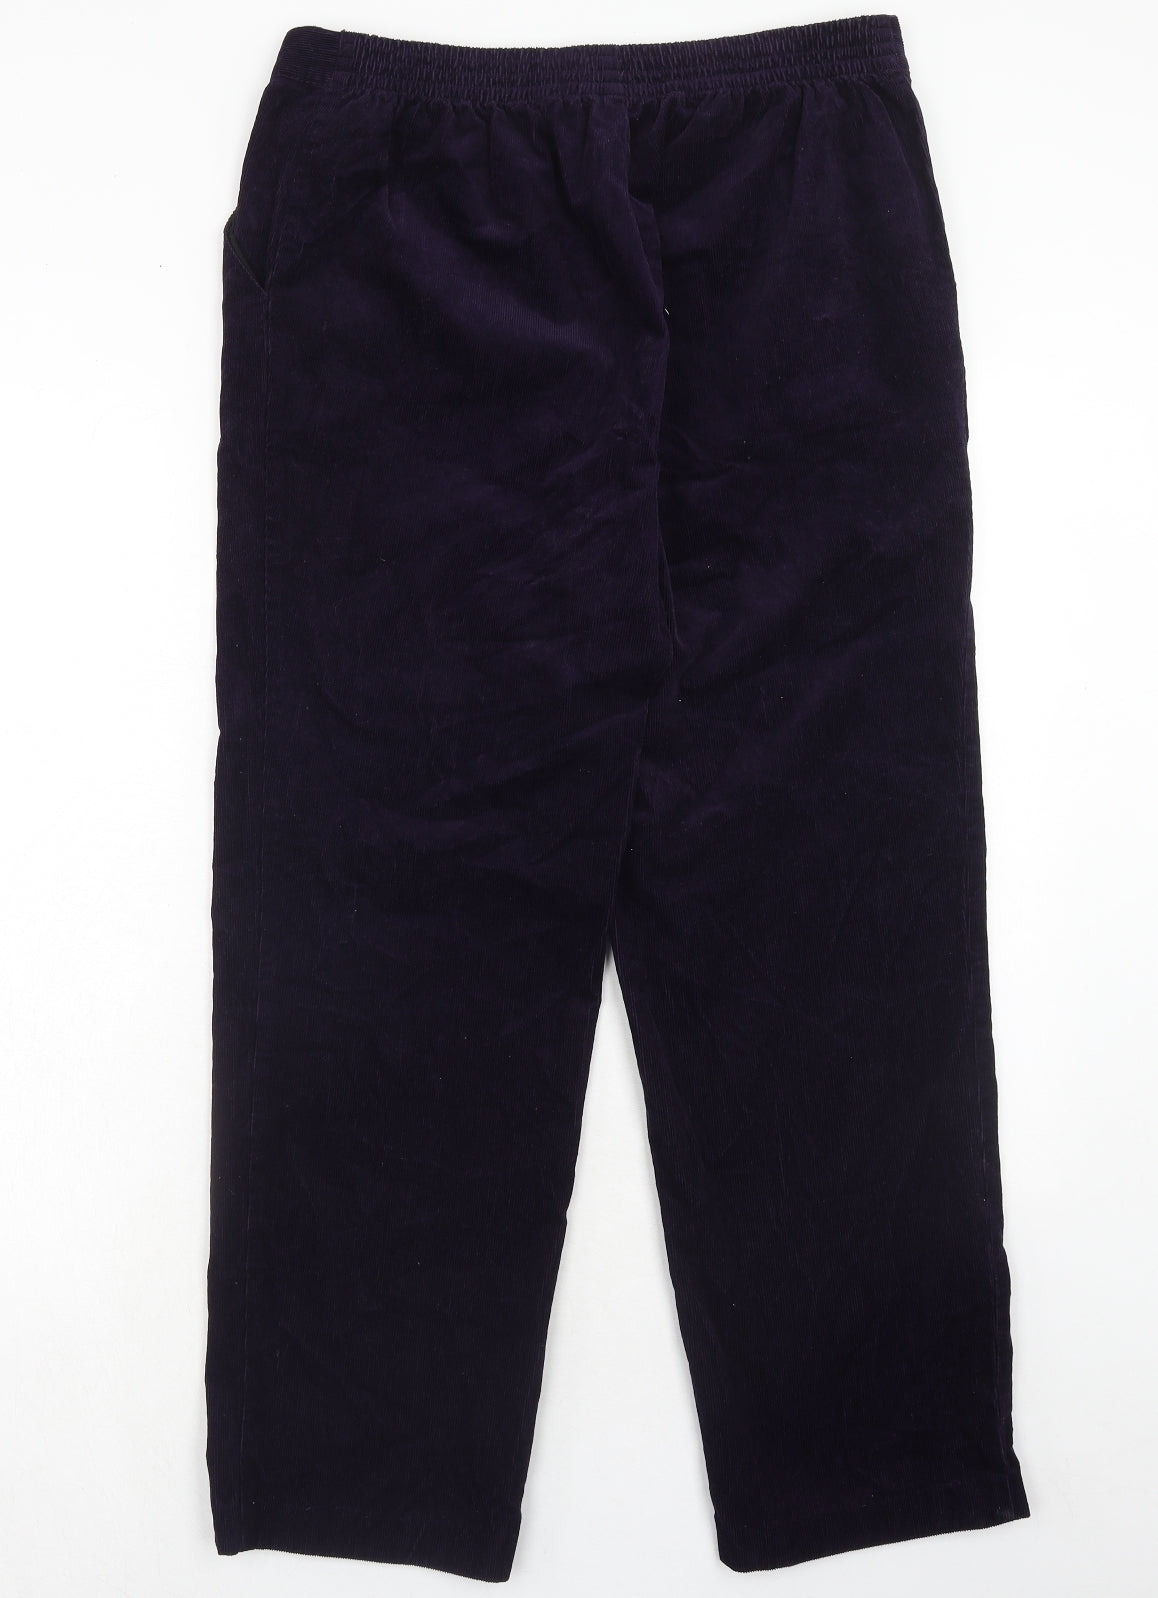 Marks and Spencer Womens Purple Cotton Trousers Size 14 Regular